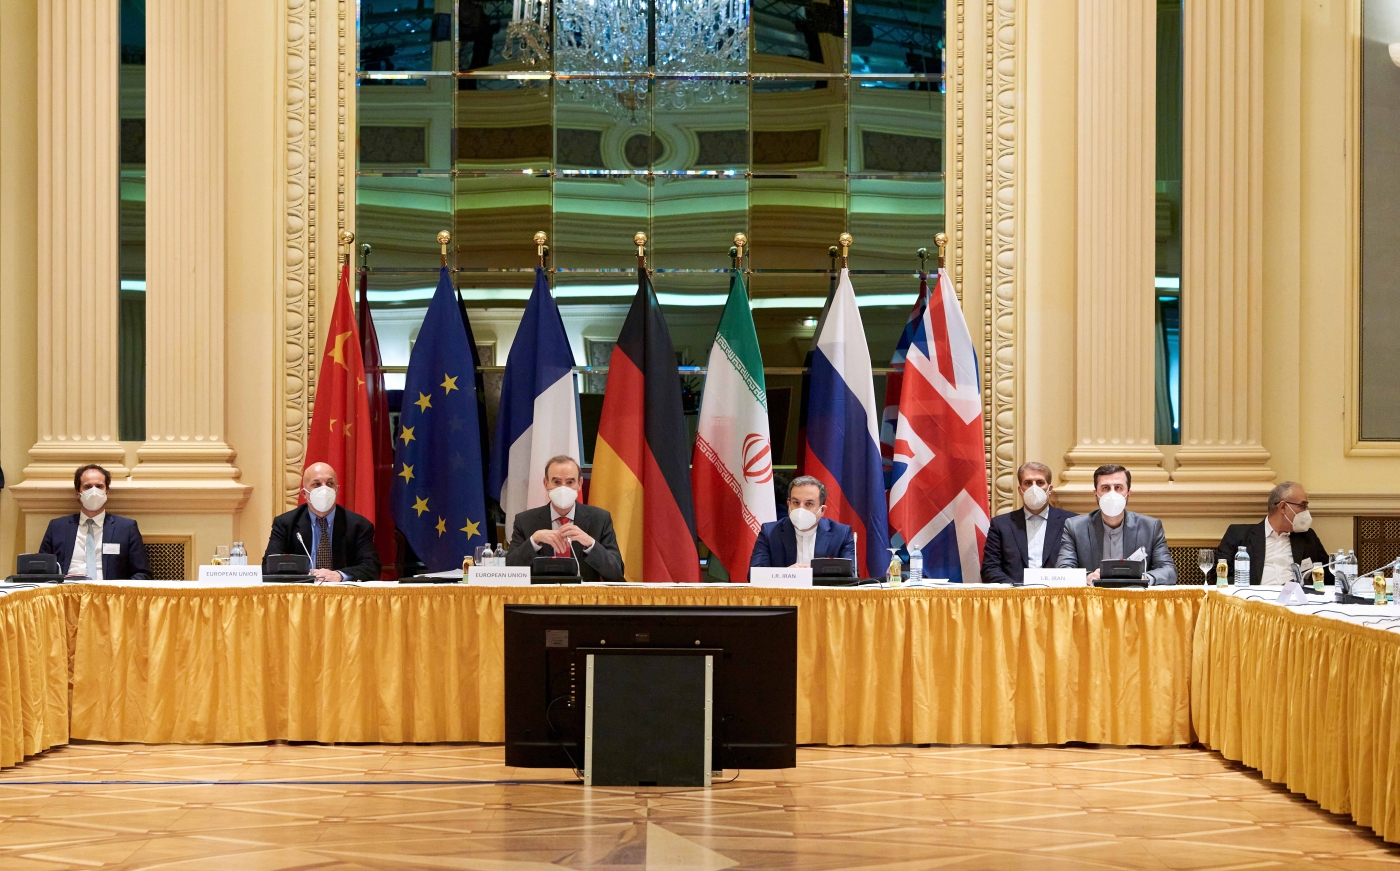 The second round of ongoing nuclear negotiations in Vienna wrapped up for this week and the next round is set to resume next week.